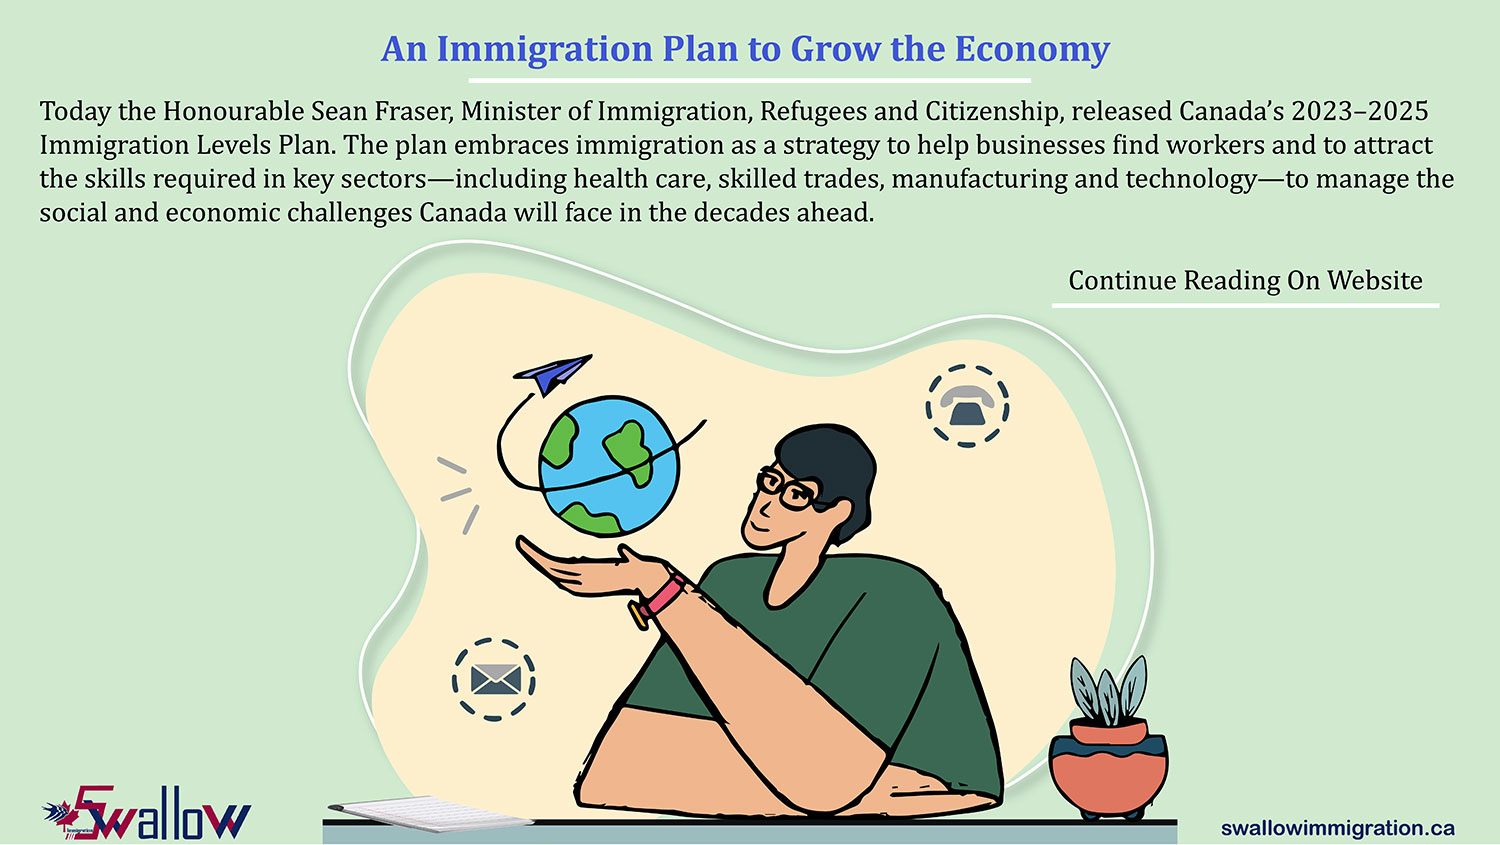 An Immigration Plan to Grow the Economy